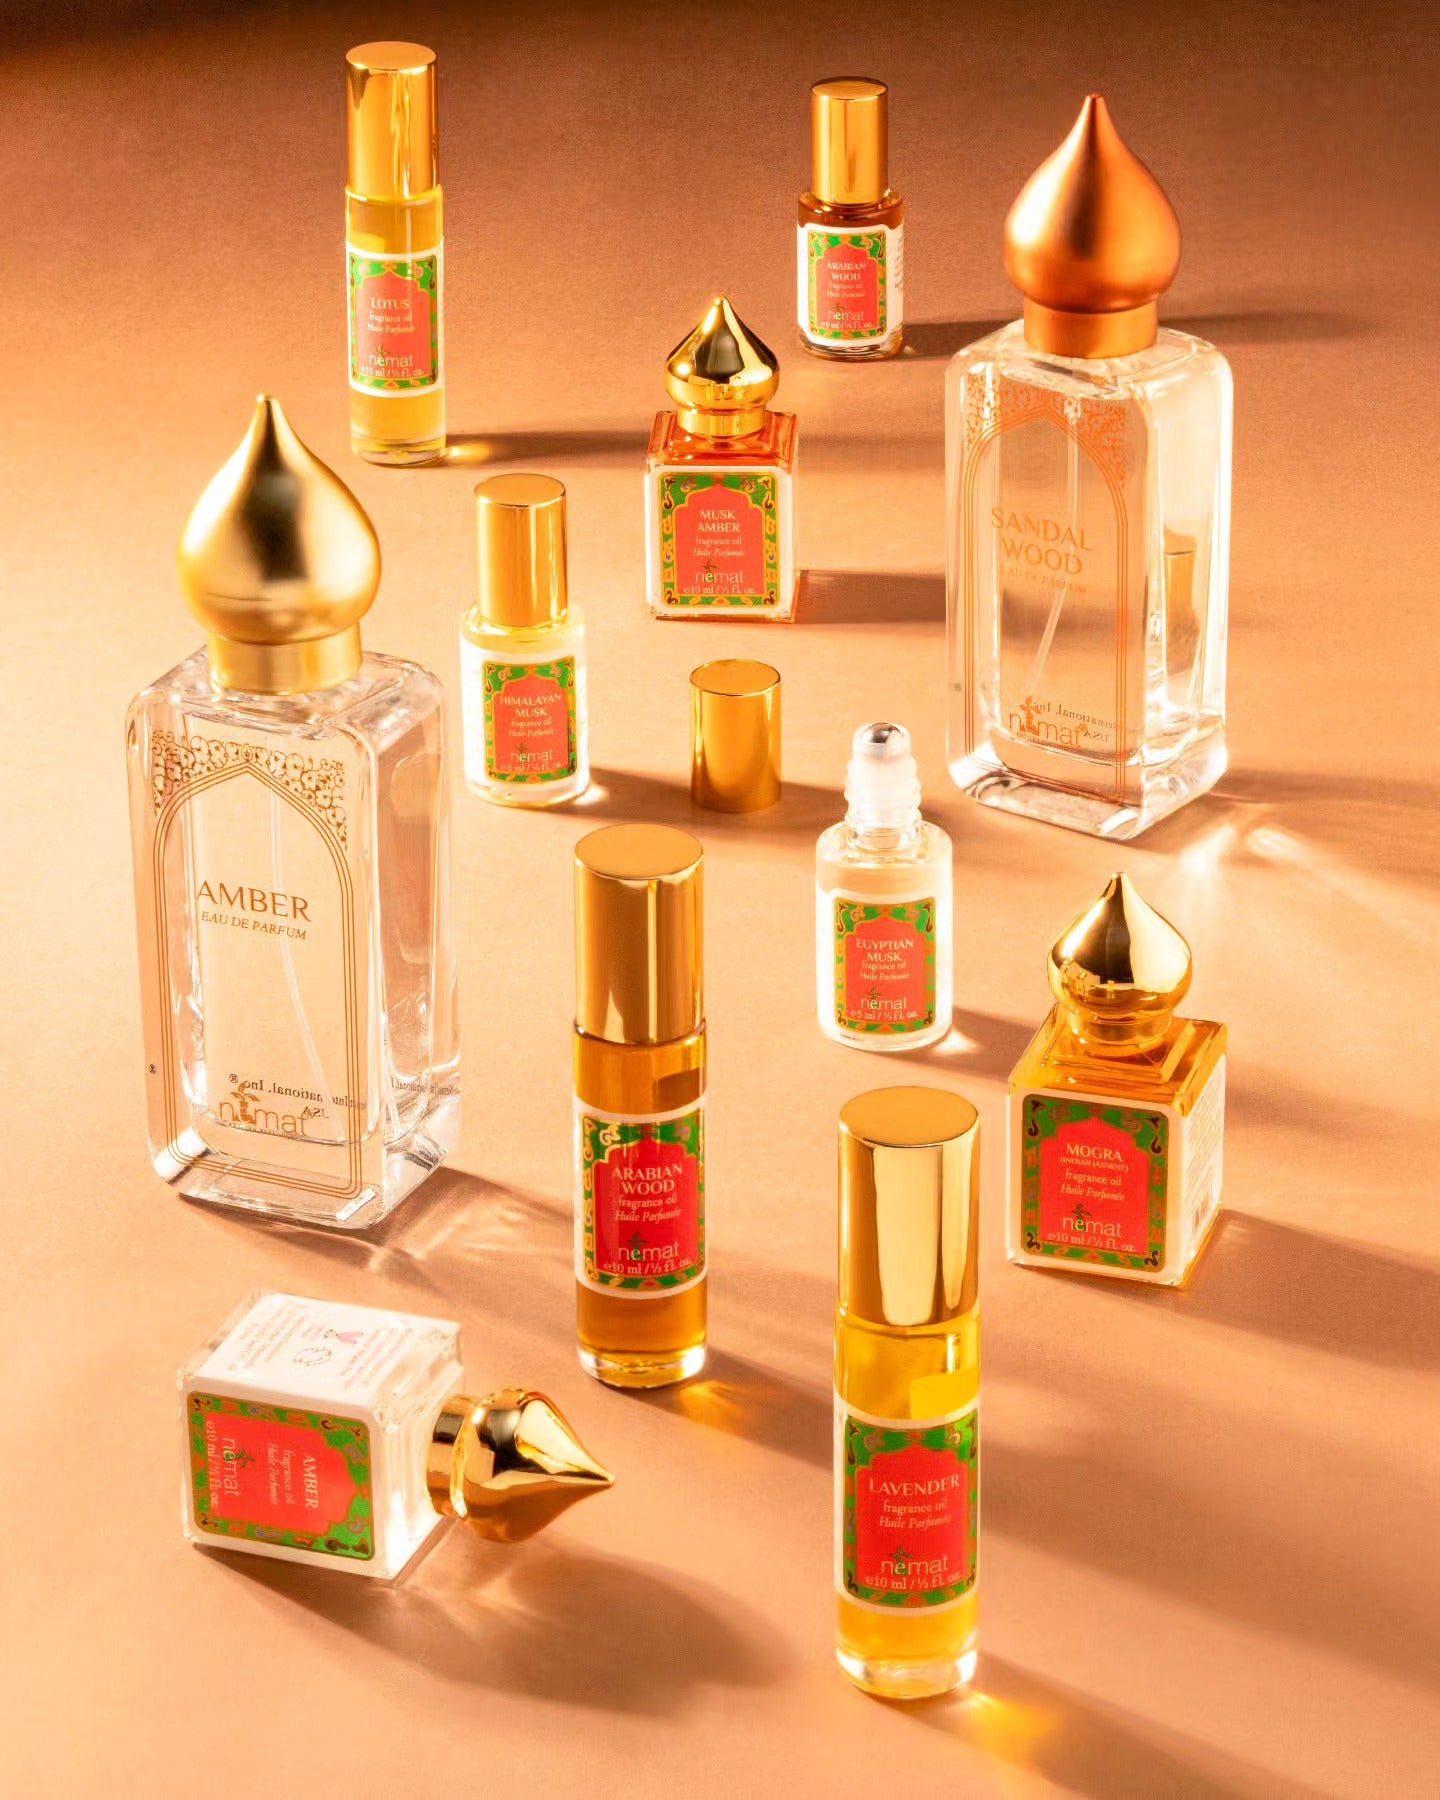 Nemat Amber Fragrance Oil, rich and musky scent, long-lasting perfume oil, luxurious personal aroma, available at wehitpan.com, Tiktok approved